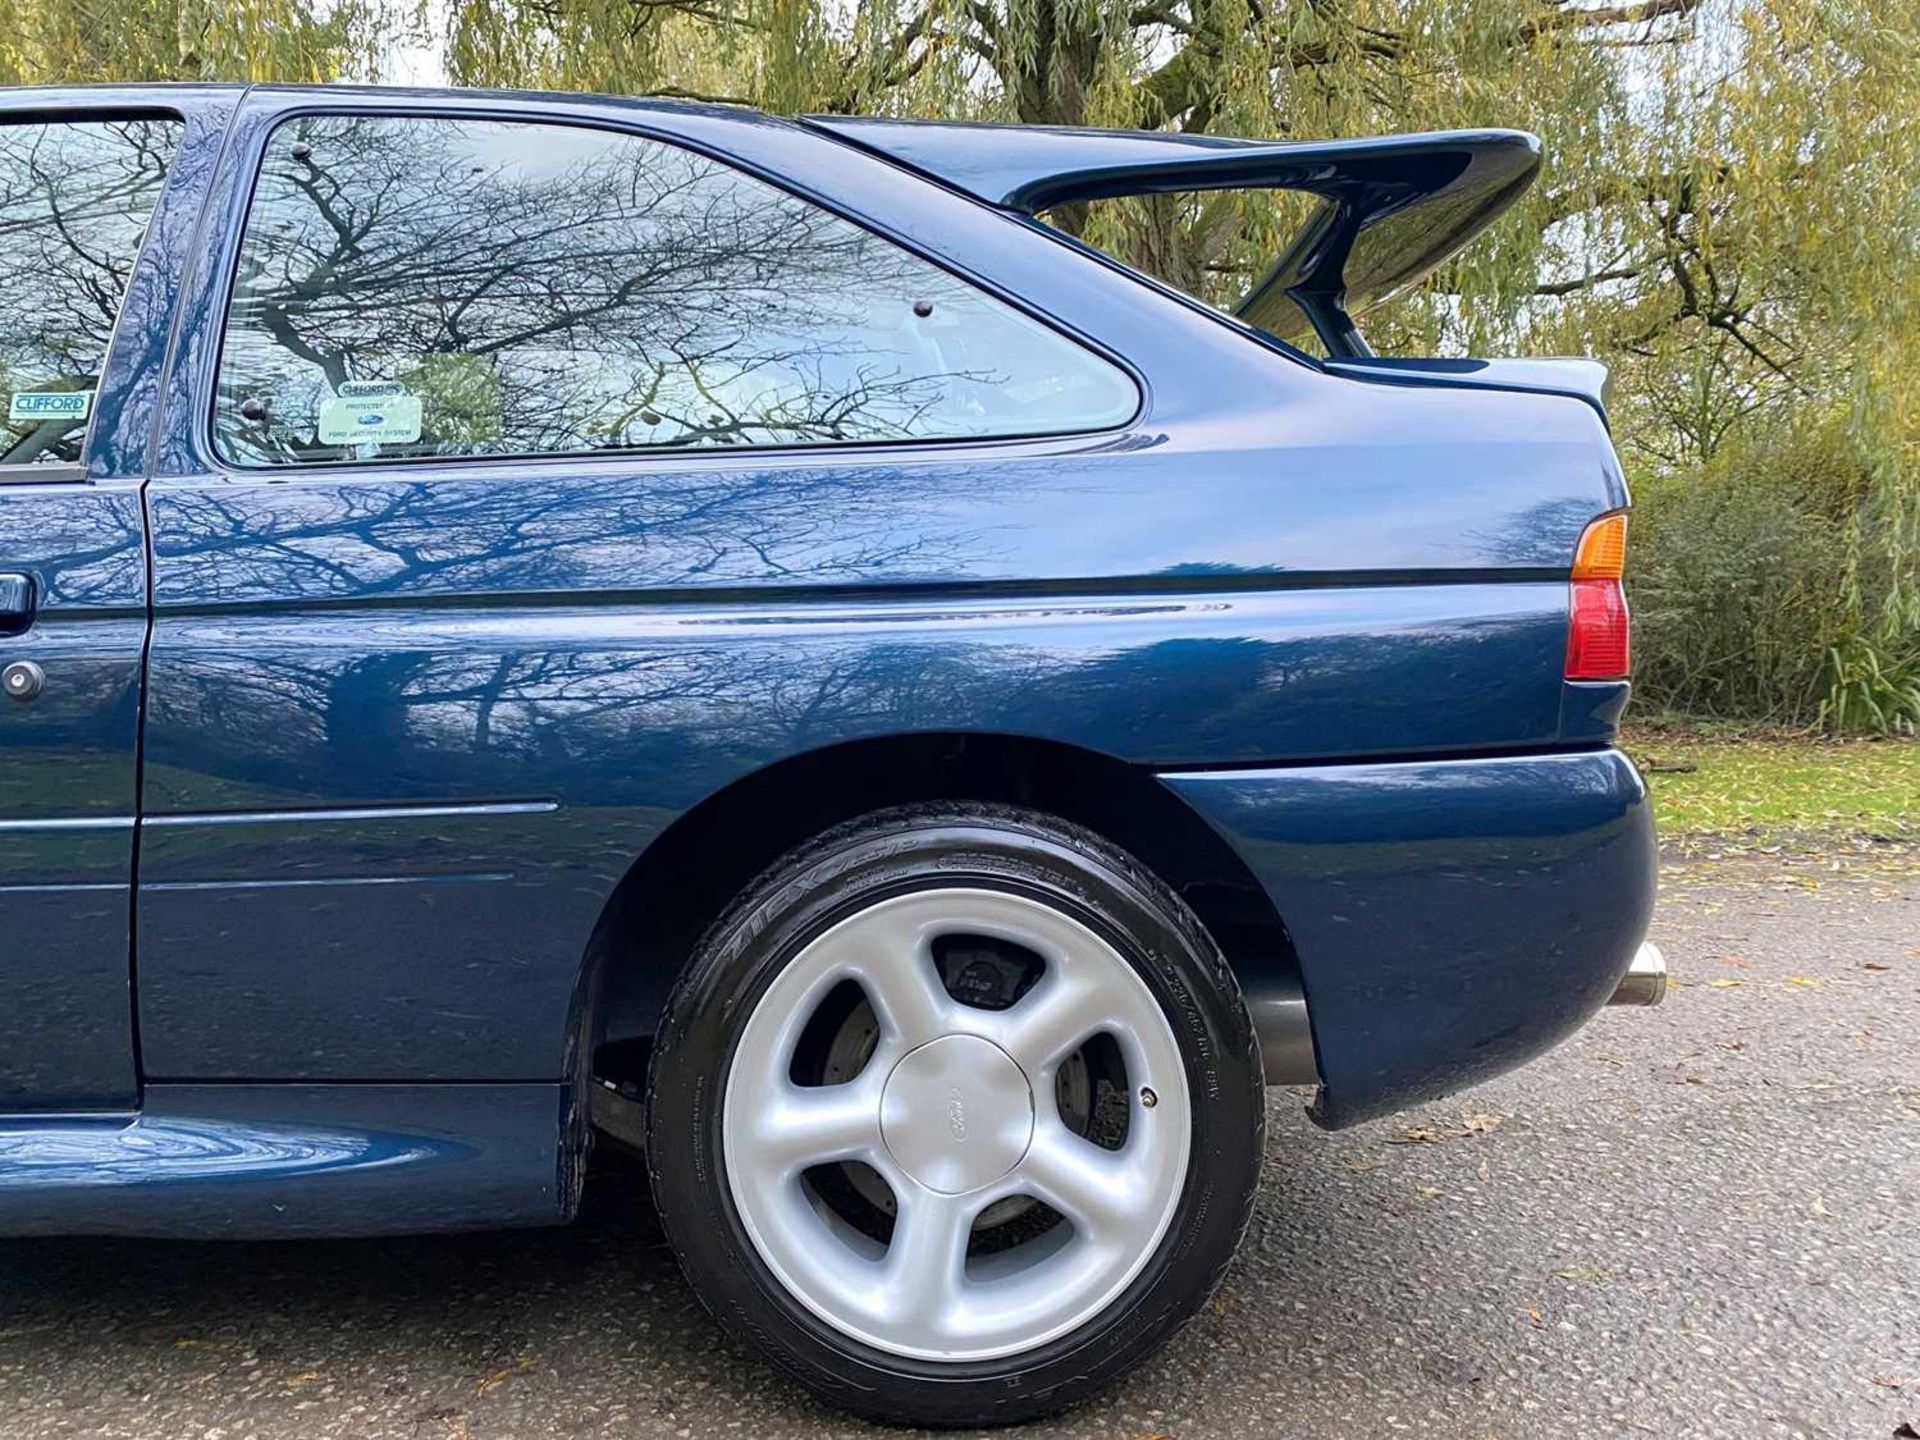 1995 Ford Escort RS Cosworth LUX Only 56,000 miles, finished in rare Petrol Blue - Image 69 of 98